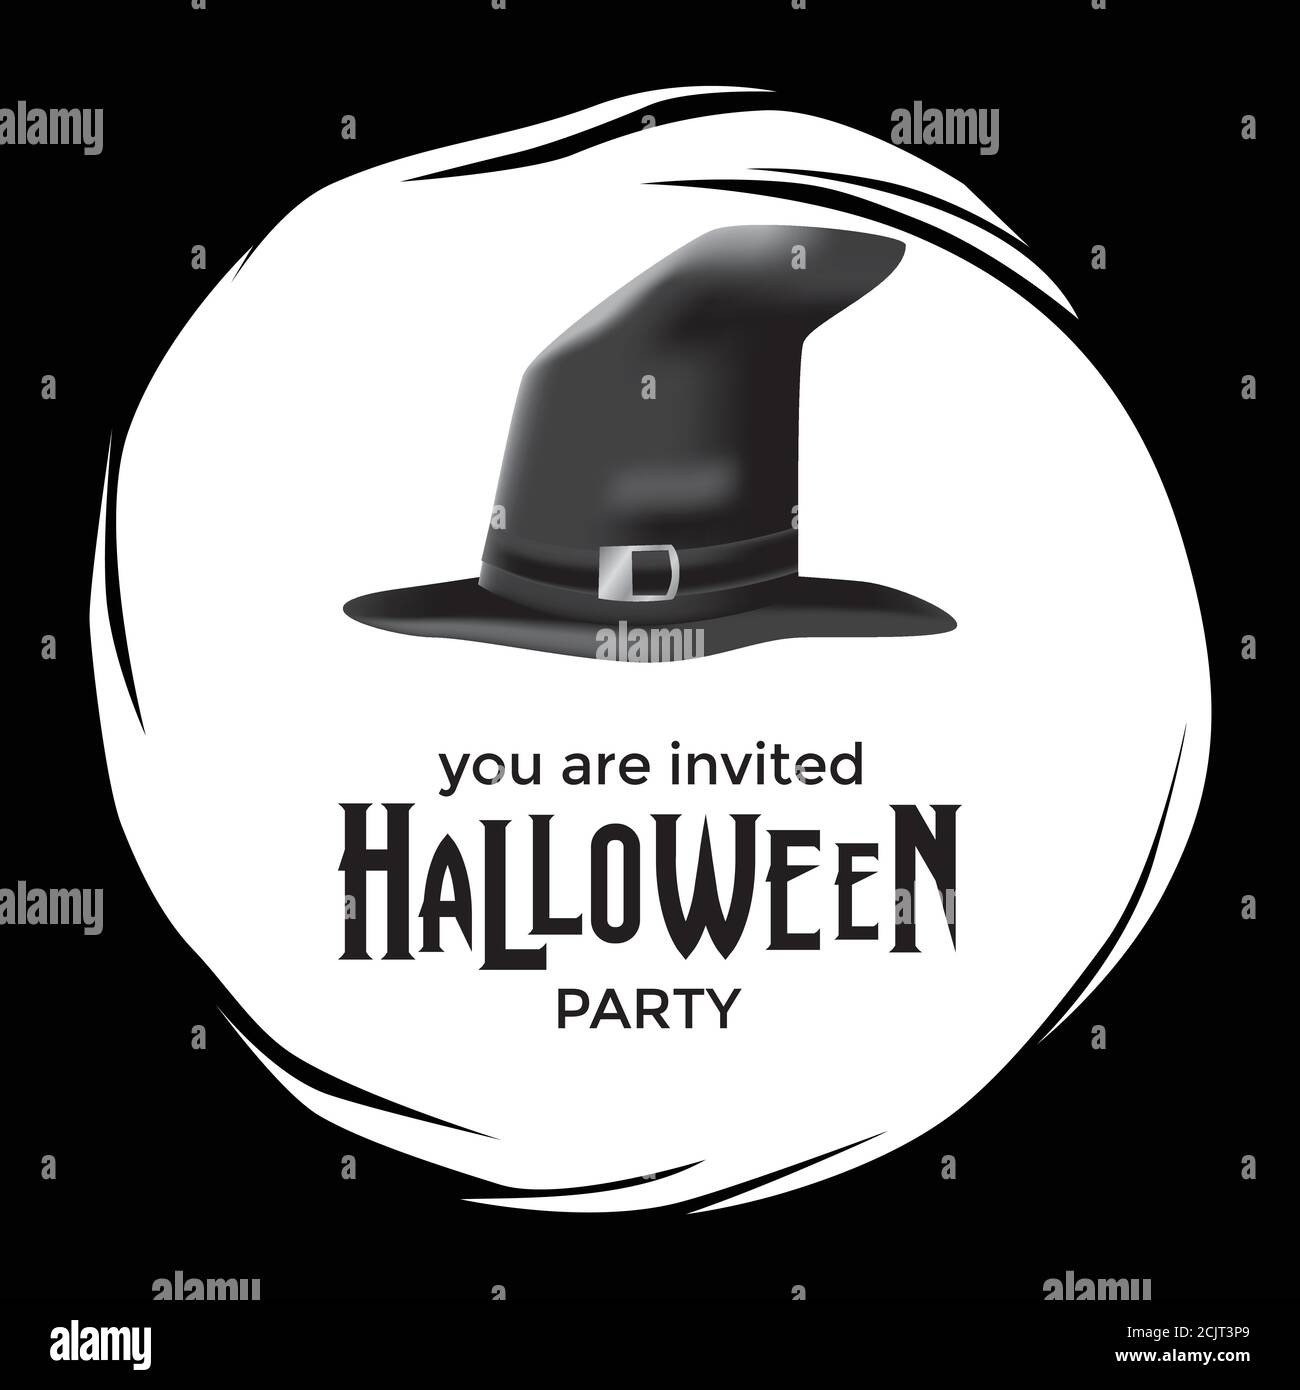 Halloween party banner template with circle frame and illustration of wizard hat Stock Vector